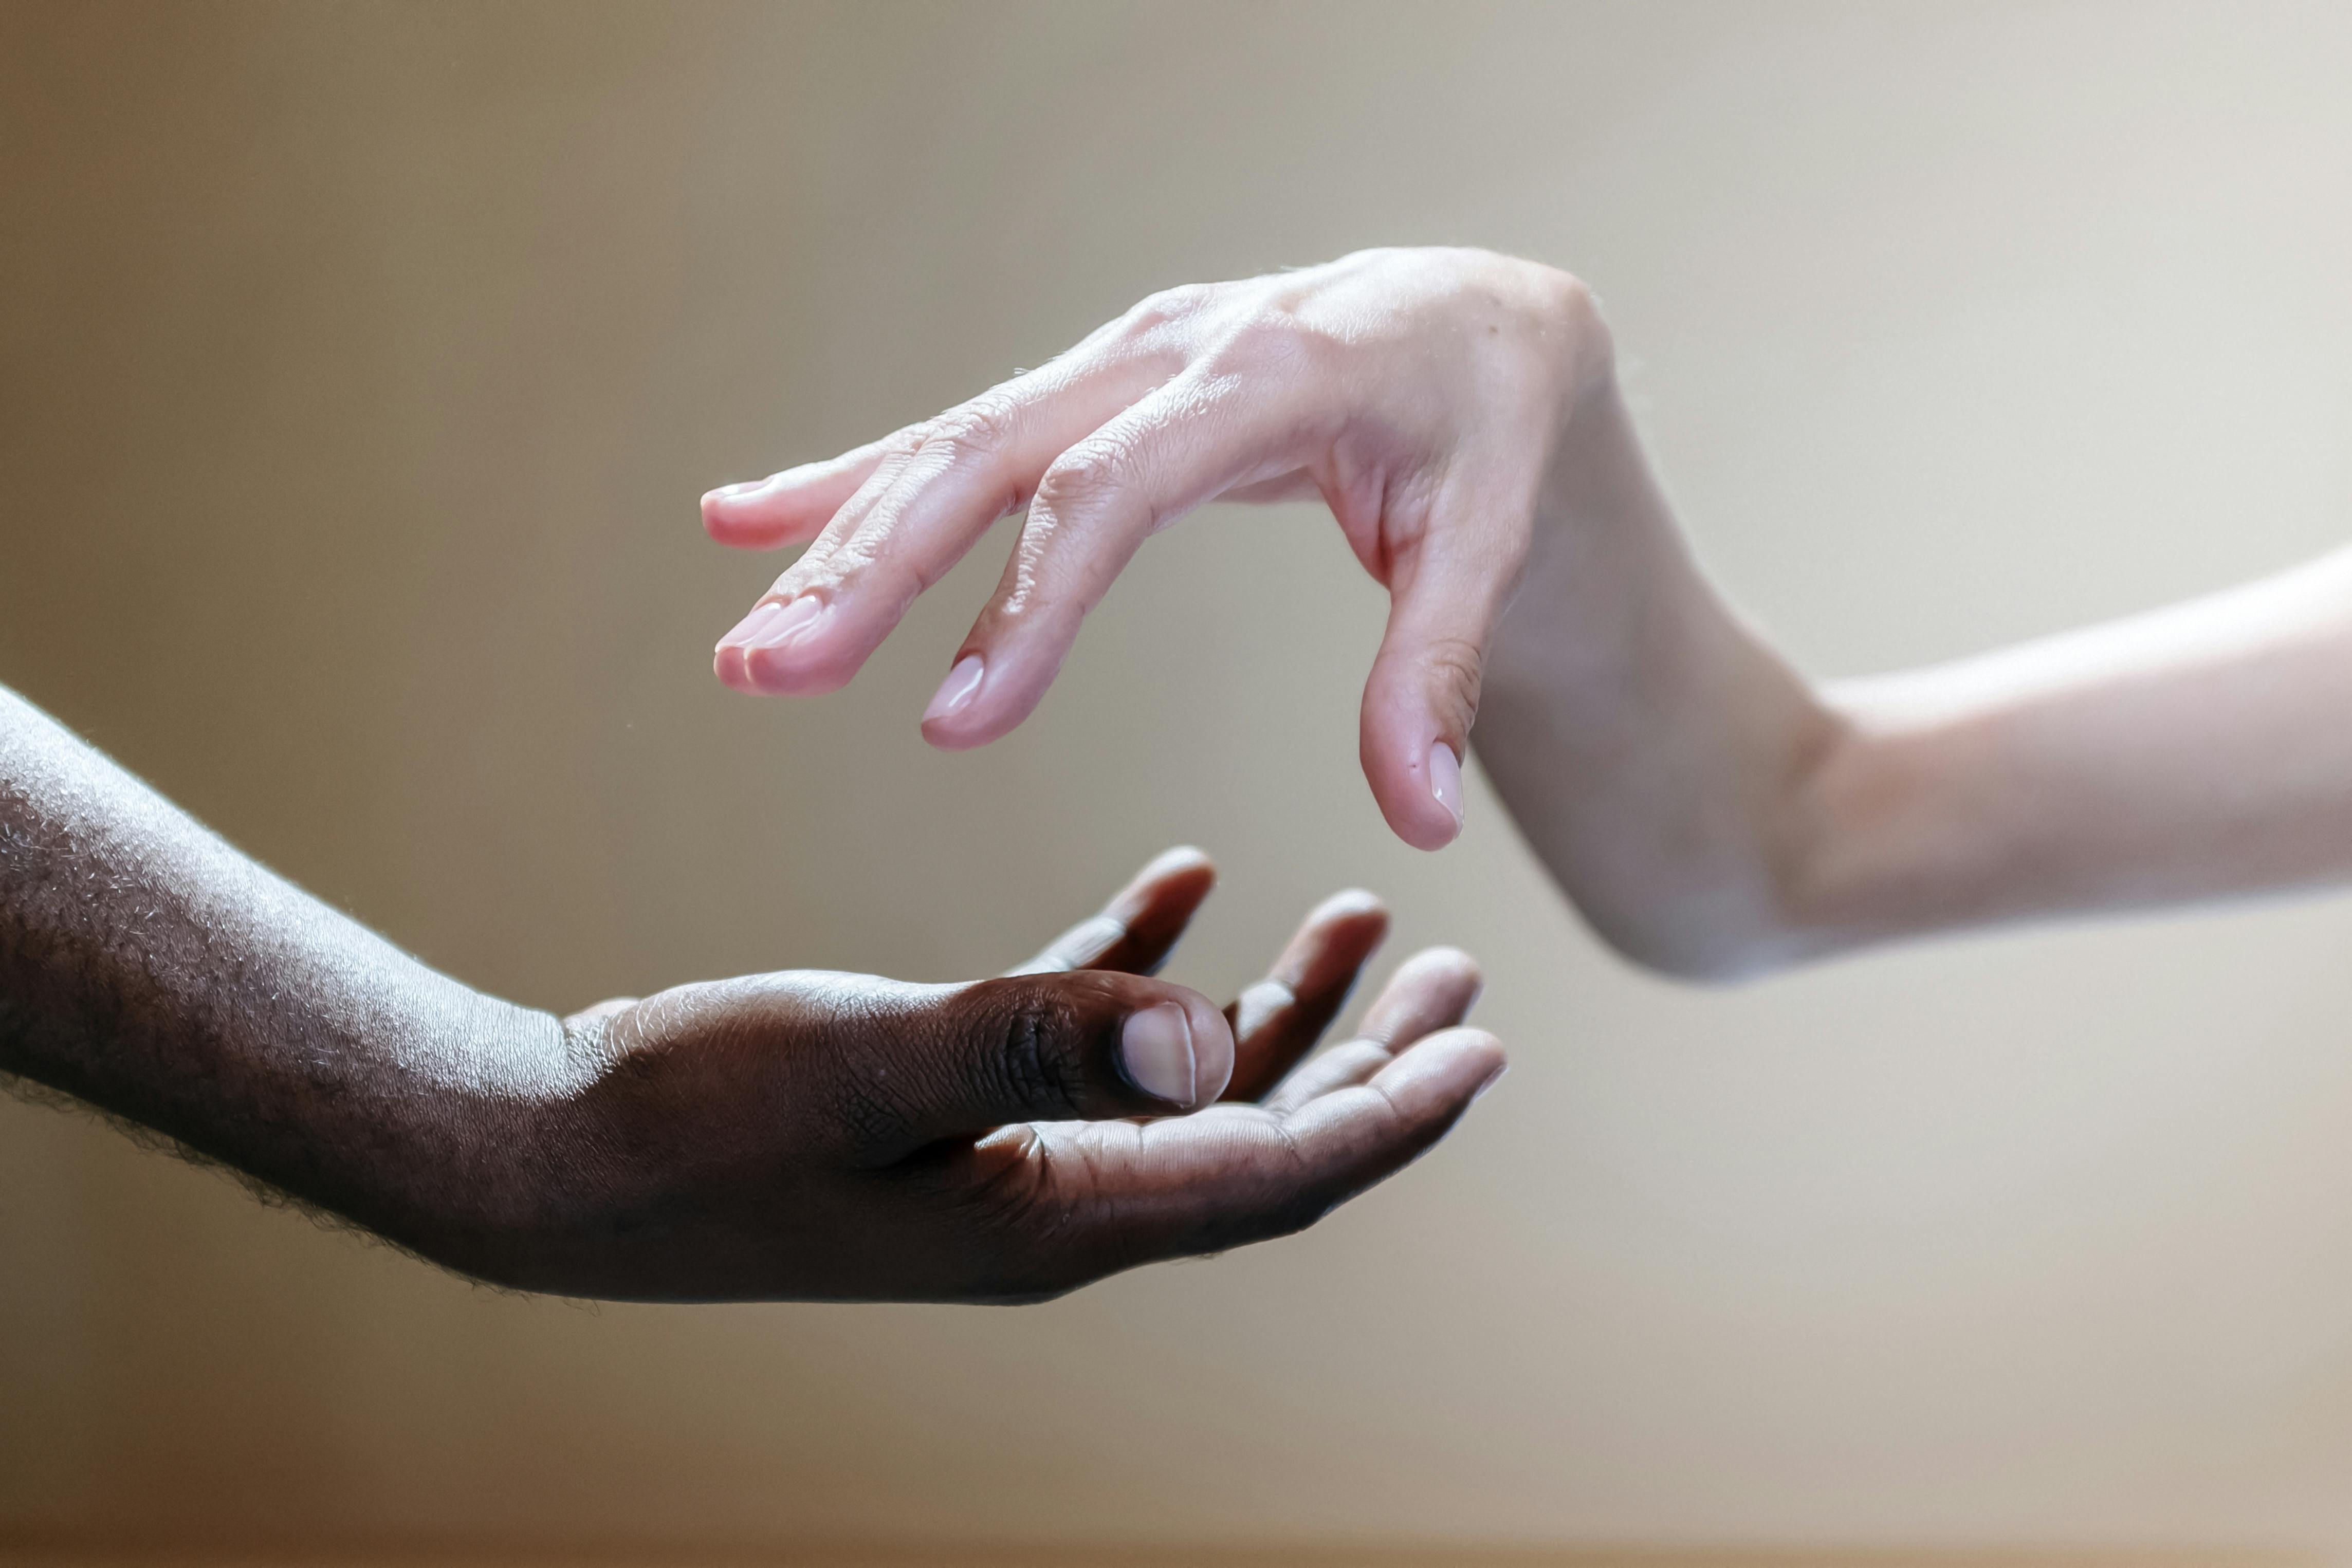 Hands with different skin tones